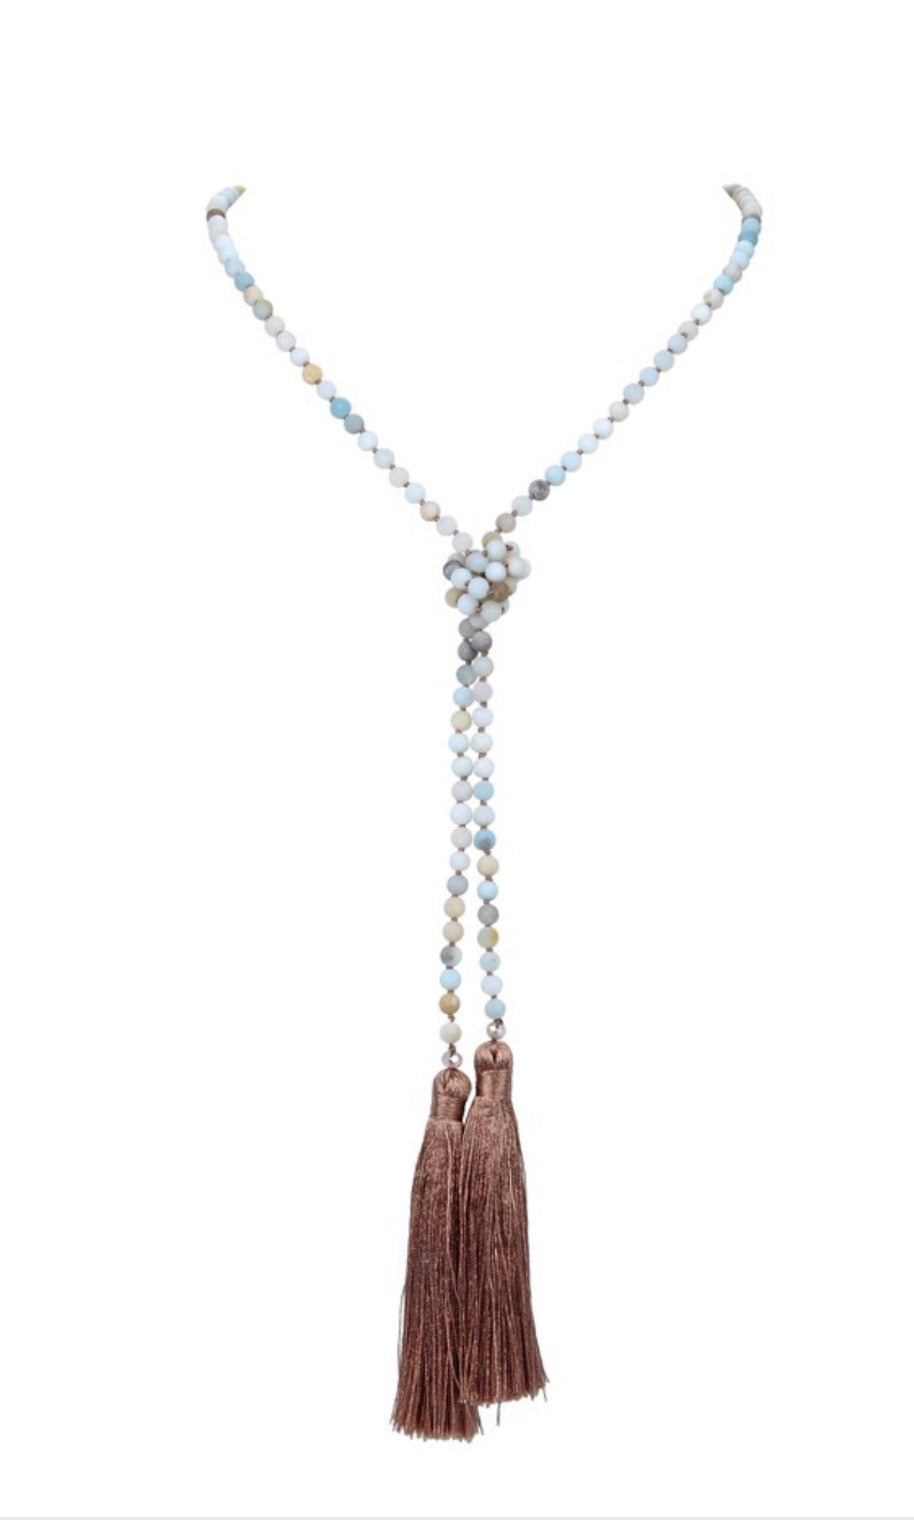 Mocha Tassel Knotted Necklace